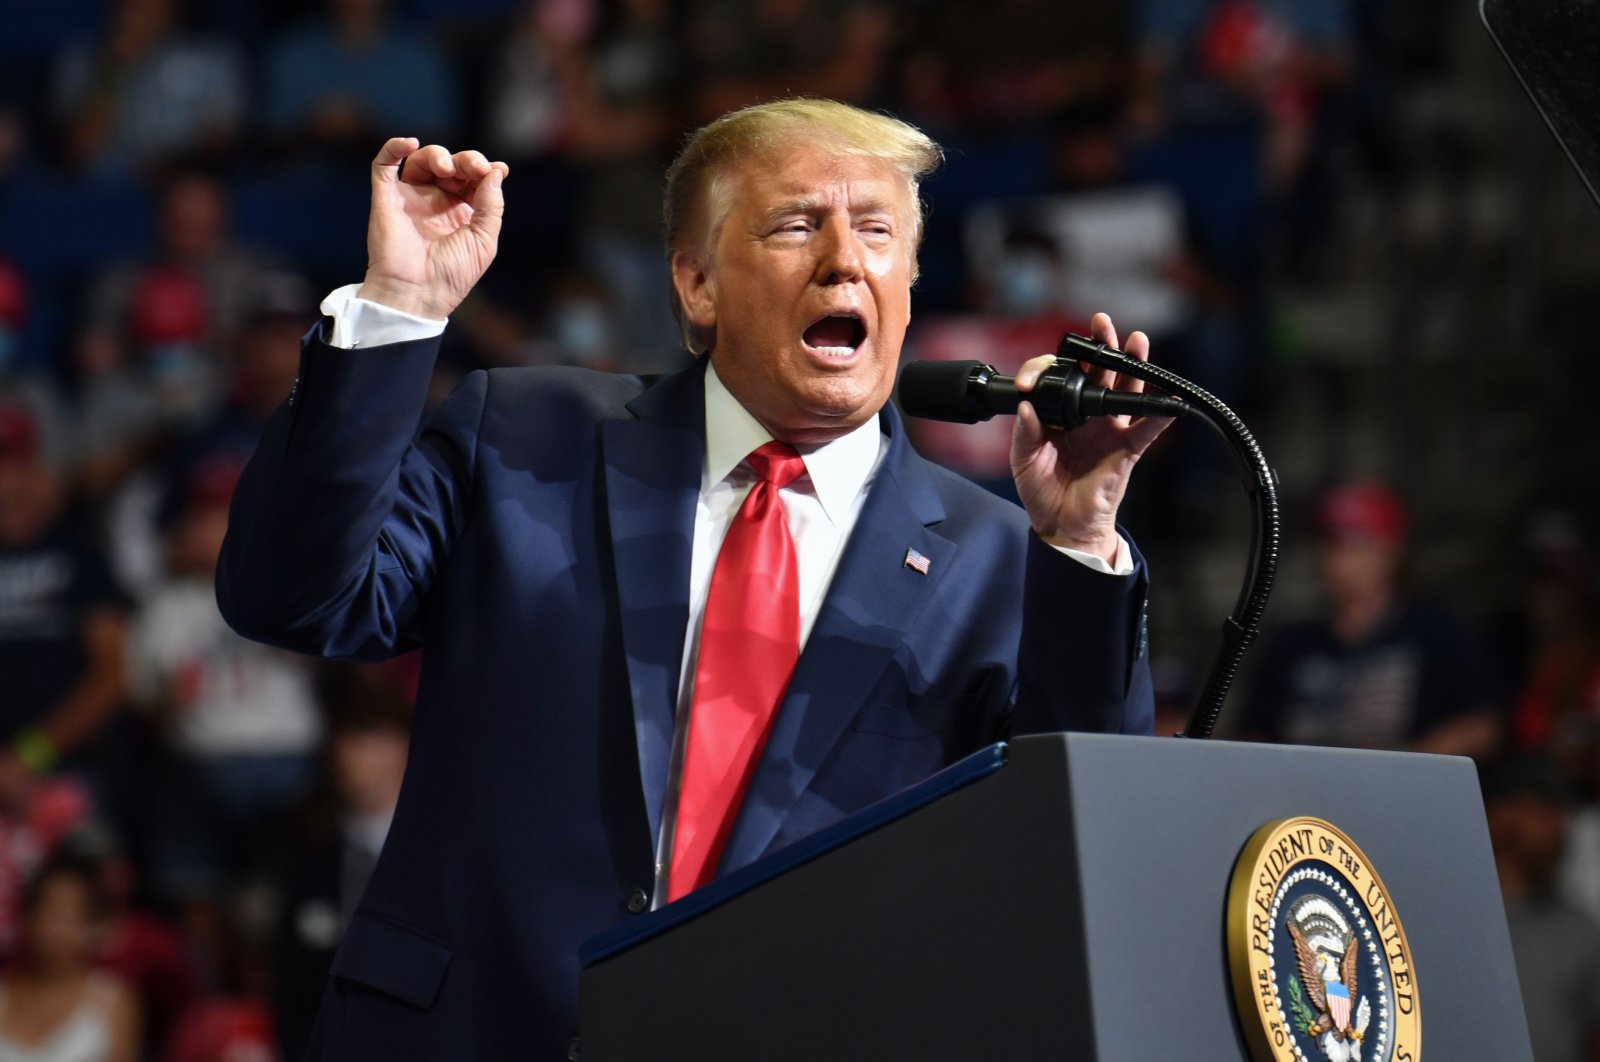 U.S. President Donald Trump speaks during a campaign rally at the BOK Center in Tulsa, Oklahoma, U.S., June 20, 2020. (AFP Photo)